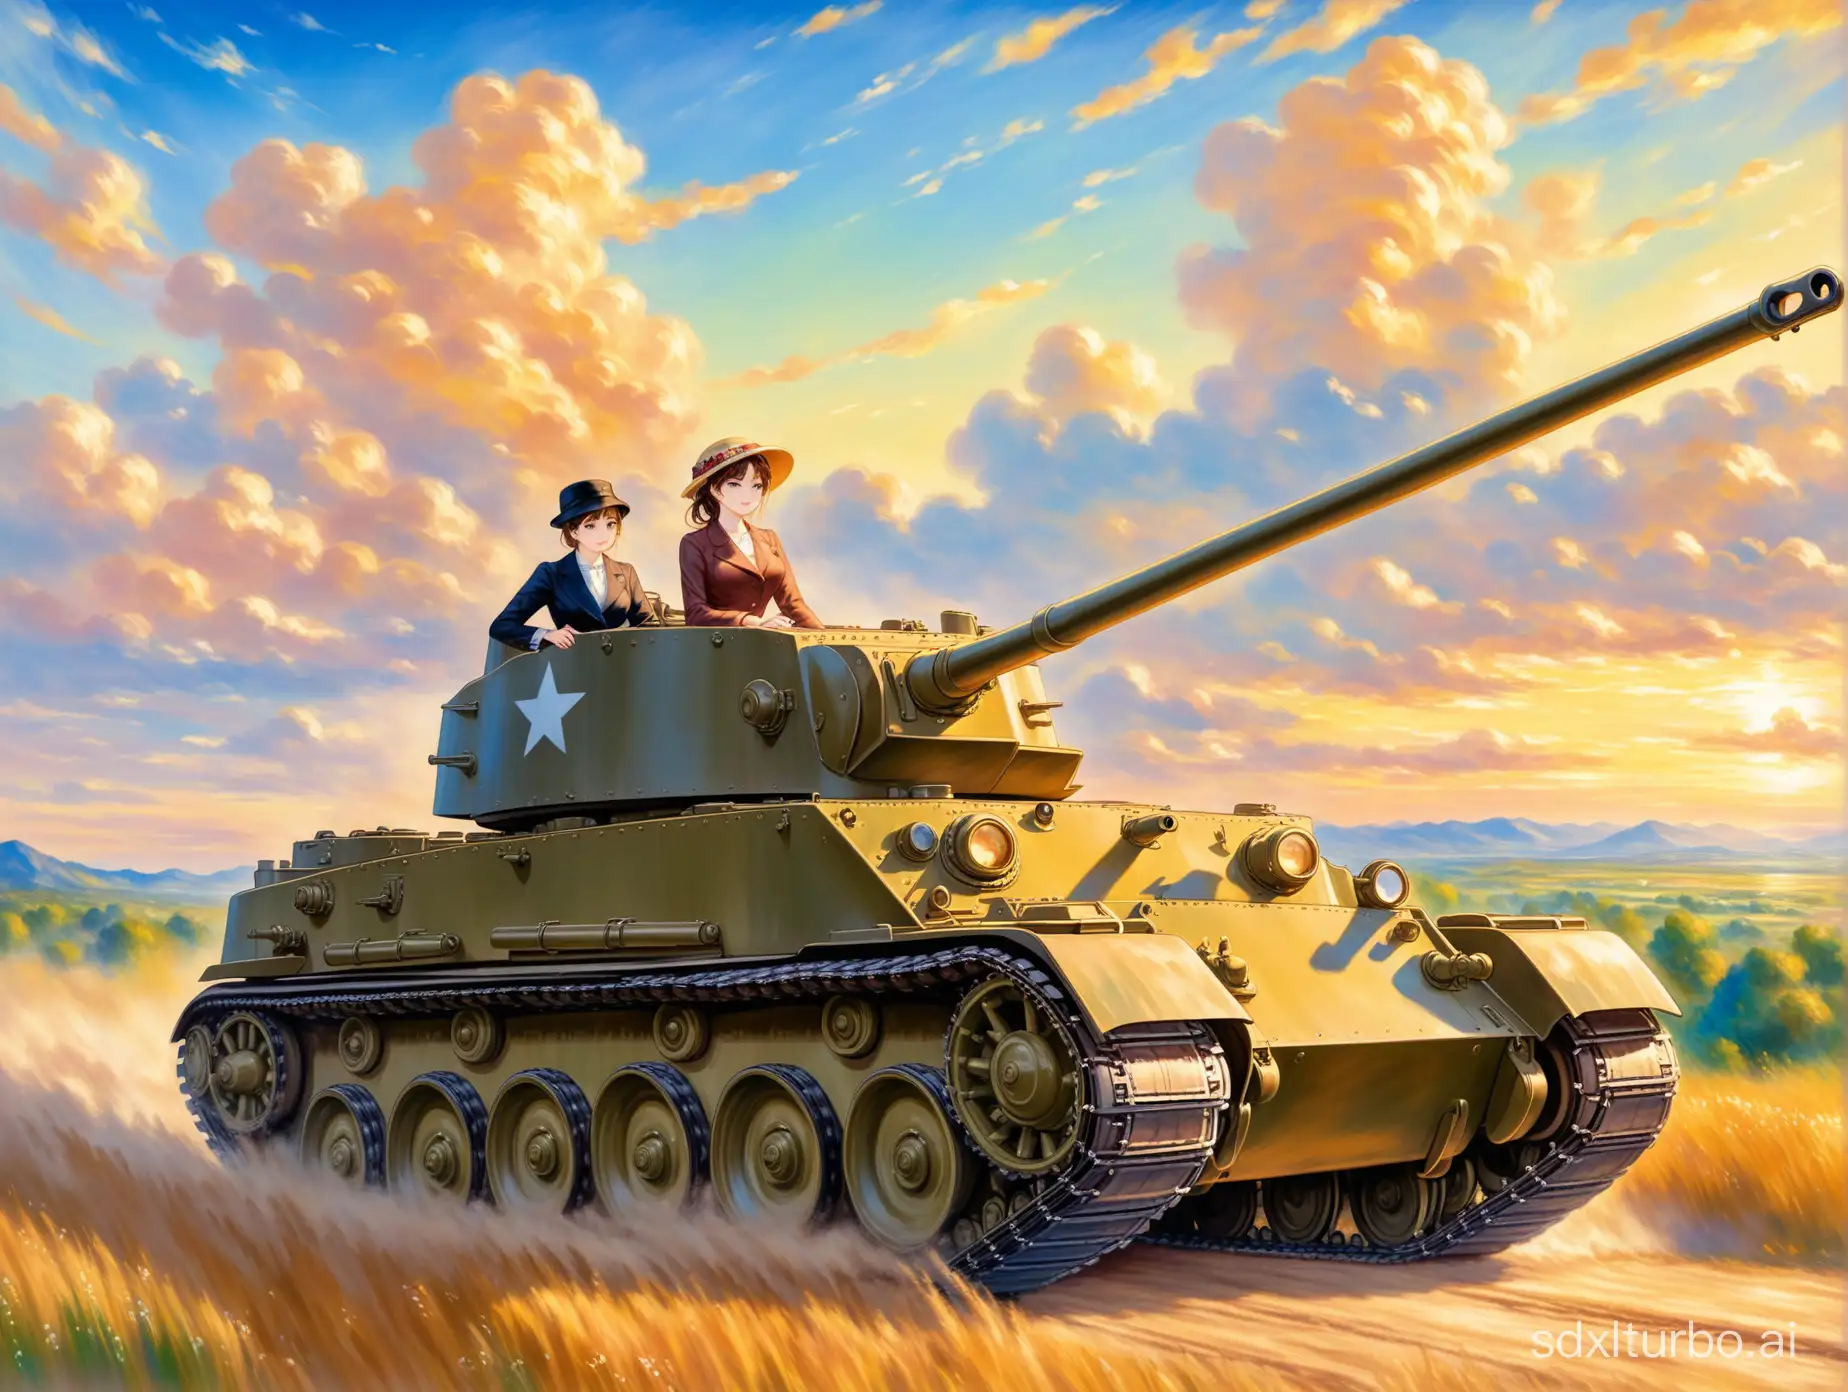 anime style majestic oil panting by auguste renoir, a woman in suit riding a m4 sherman tank, beautiful scenery